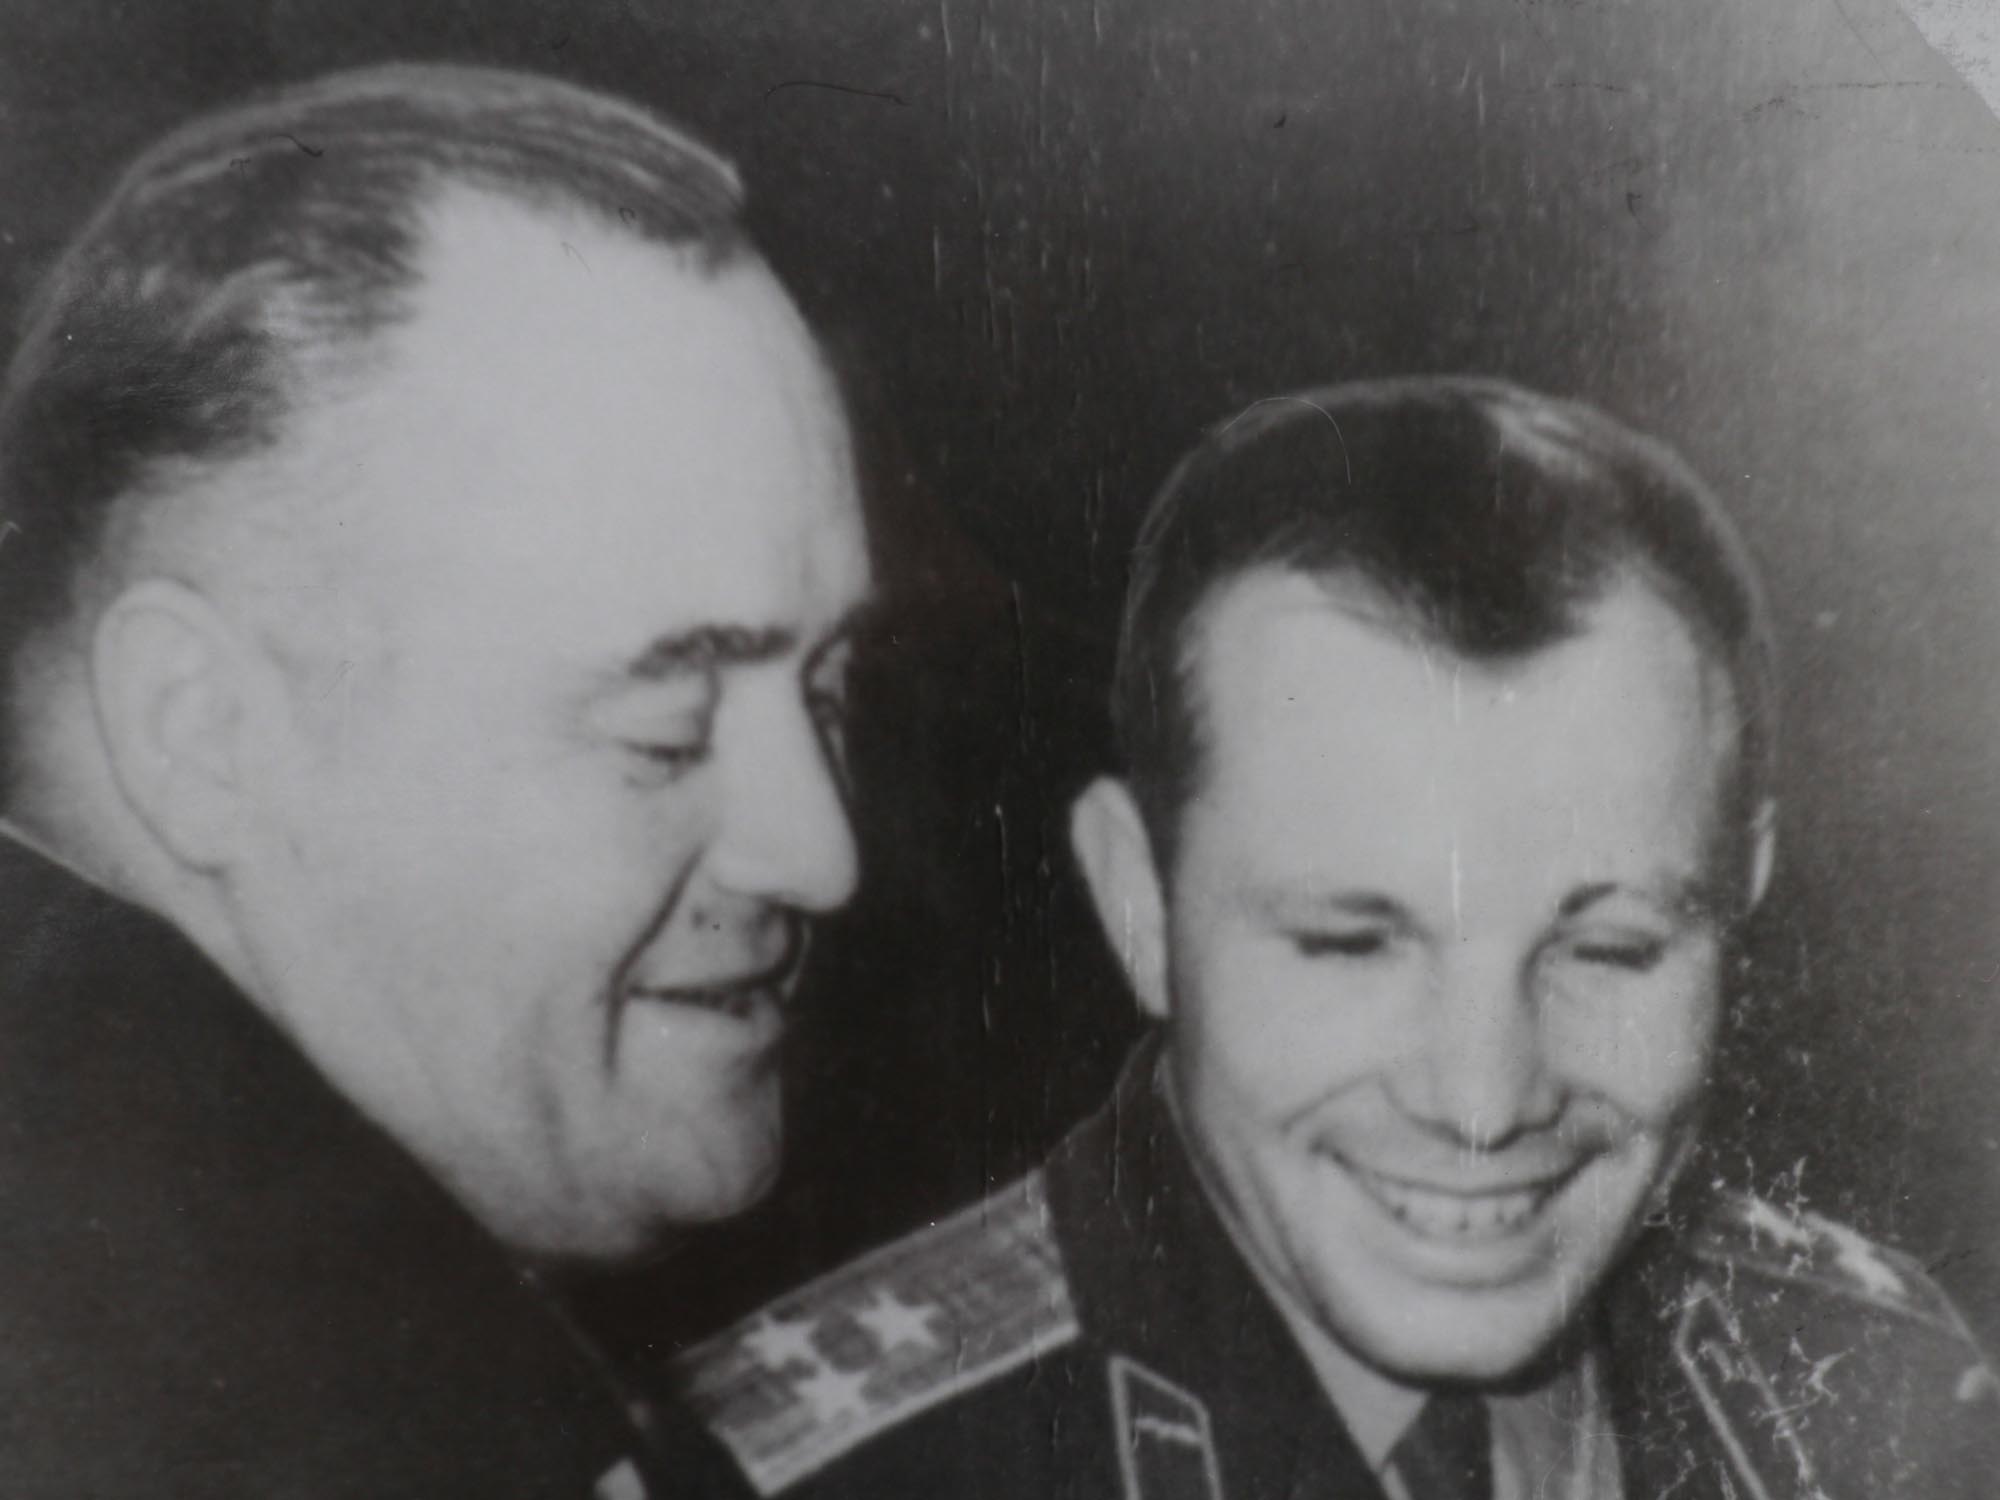 A SOVIET SIGNED PHOTOGRAPH OF KOROLEV AND GAGARIN PIC-1